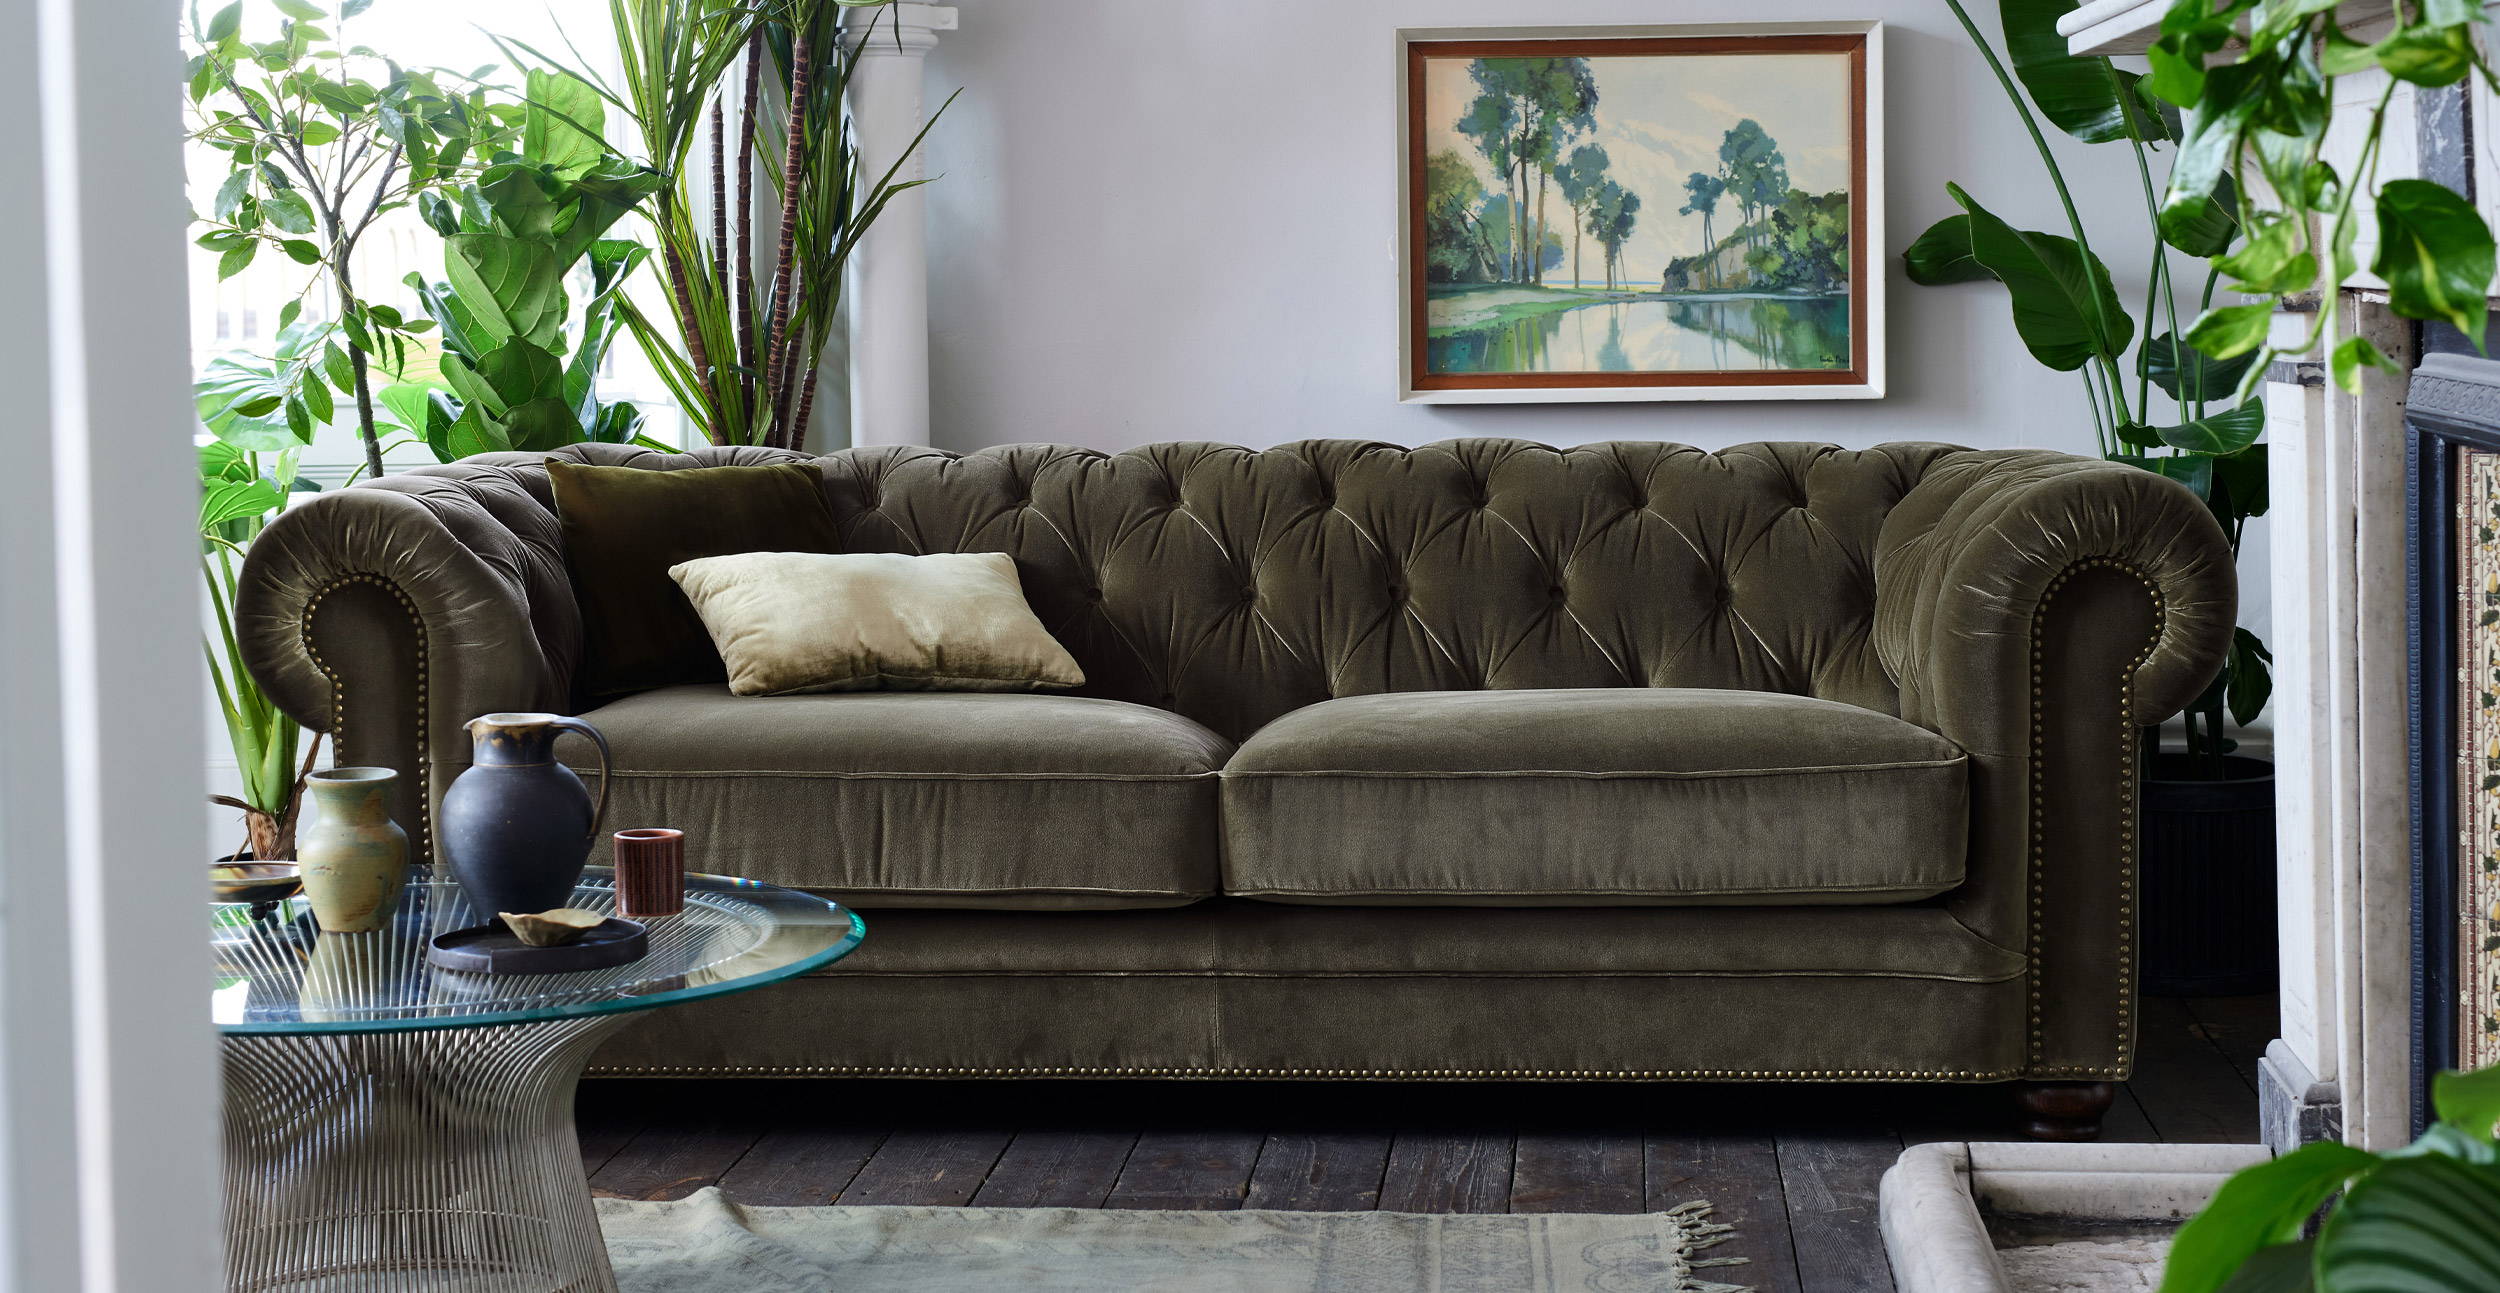 Winnie Sofa Collection - Pewter Studs & Memory Foam Seats - An Update Of A Classic Style